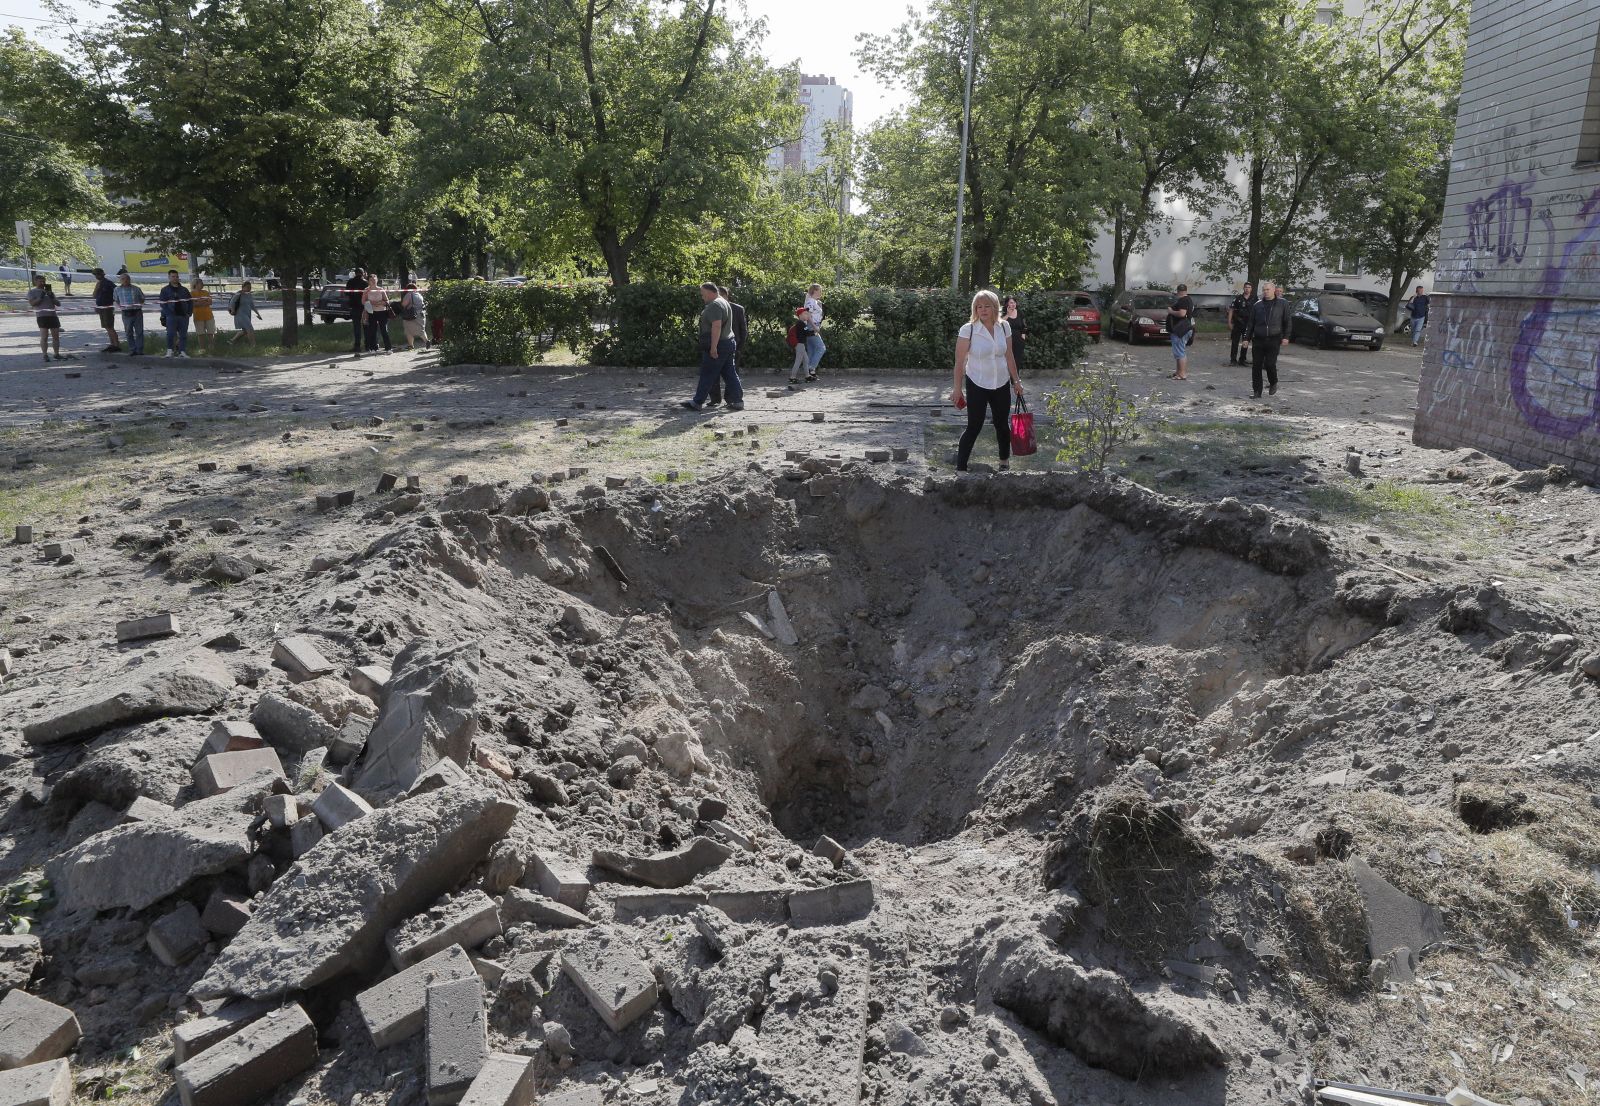 epa10666555 A person stands next to a shell crater near a residential building after a missile strike in Kyiv (Kiev), Ukraine, 01 June 2023, amid the Russian invasion. At least three people died, including a child, and ten others were injured after a missile attack on the Ukrainian capital, the National Police said. Russian troops entered Ukrainian territory in February 2022, starting a conflict that has provoked destruction and a humanitarian crisis.  EPA/SERGEY DOLZHENKO